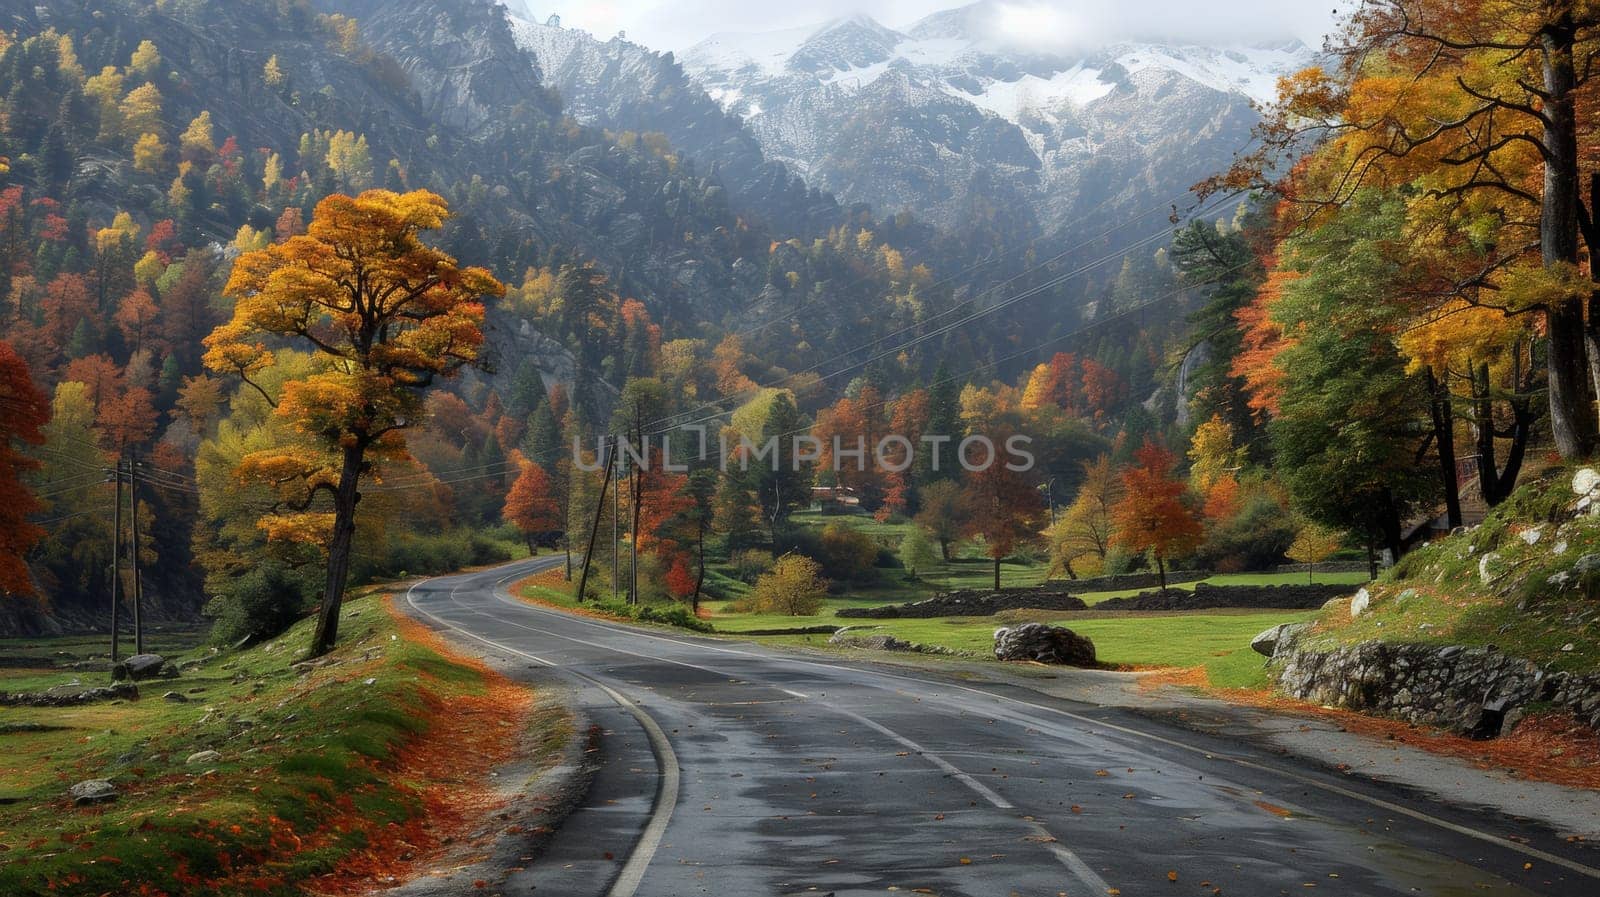 A road with trees and mountains in the background